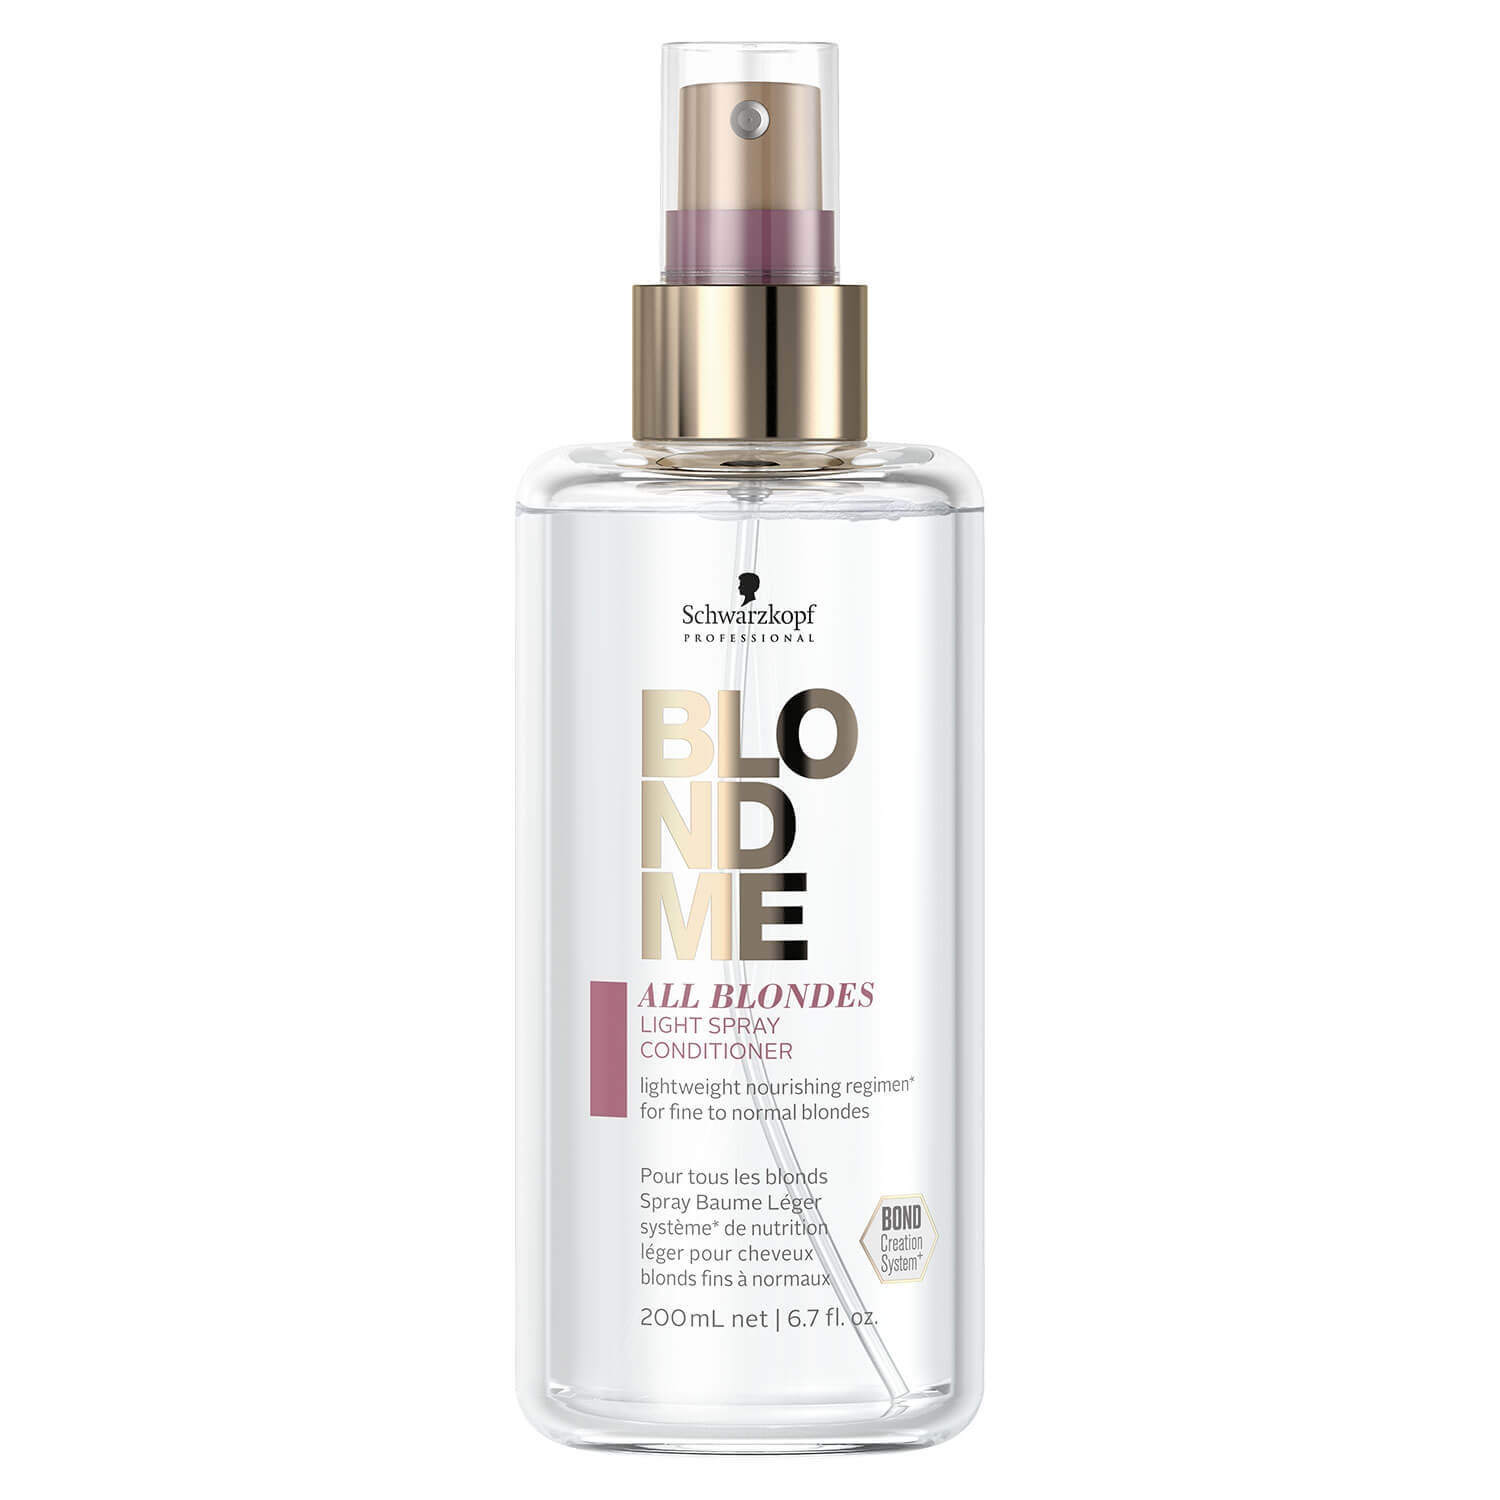 Product image from Blondme - All Blondes Light Spray Conditioner